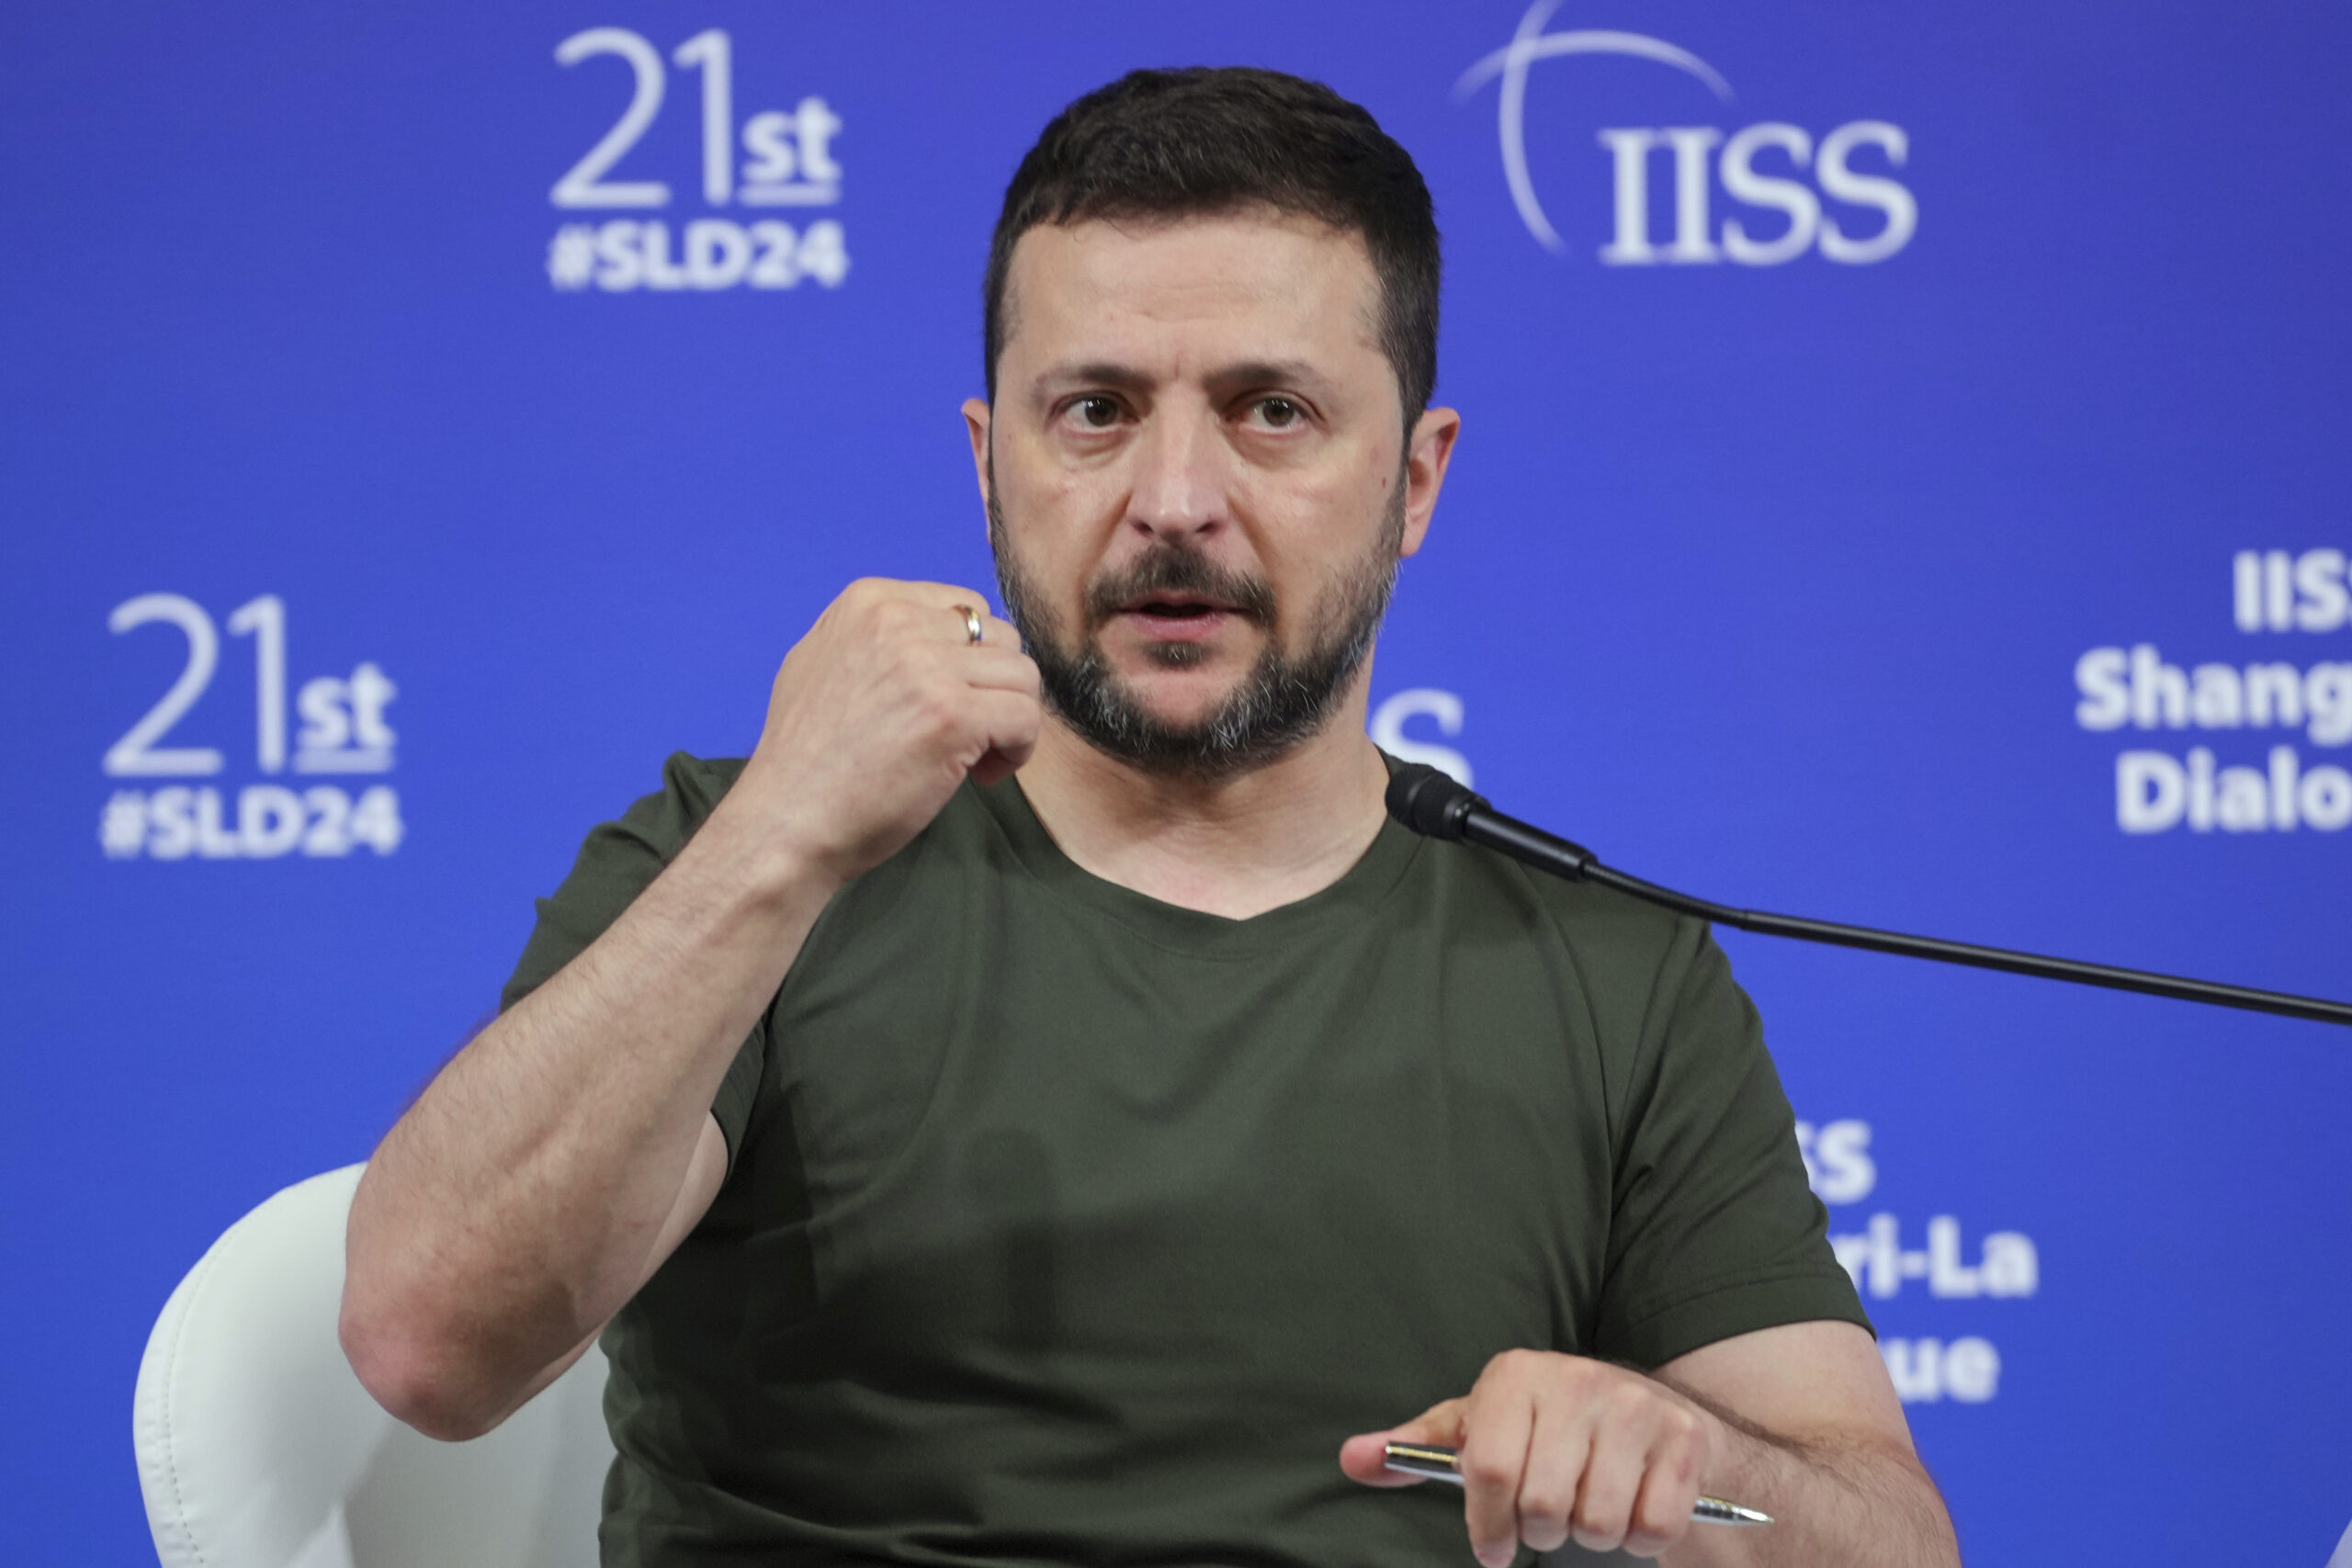 Zelensky in PH to promote peace summit he says China, Russia trying to undermine